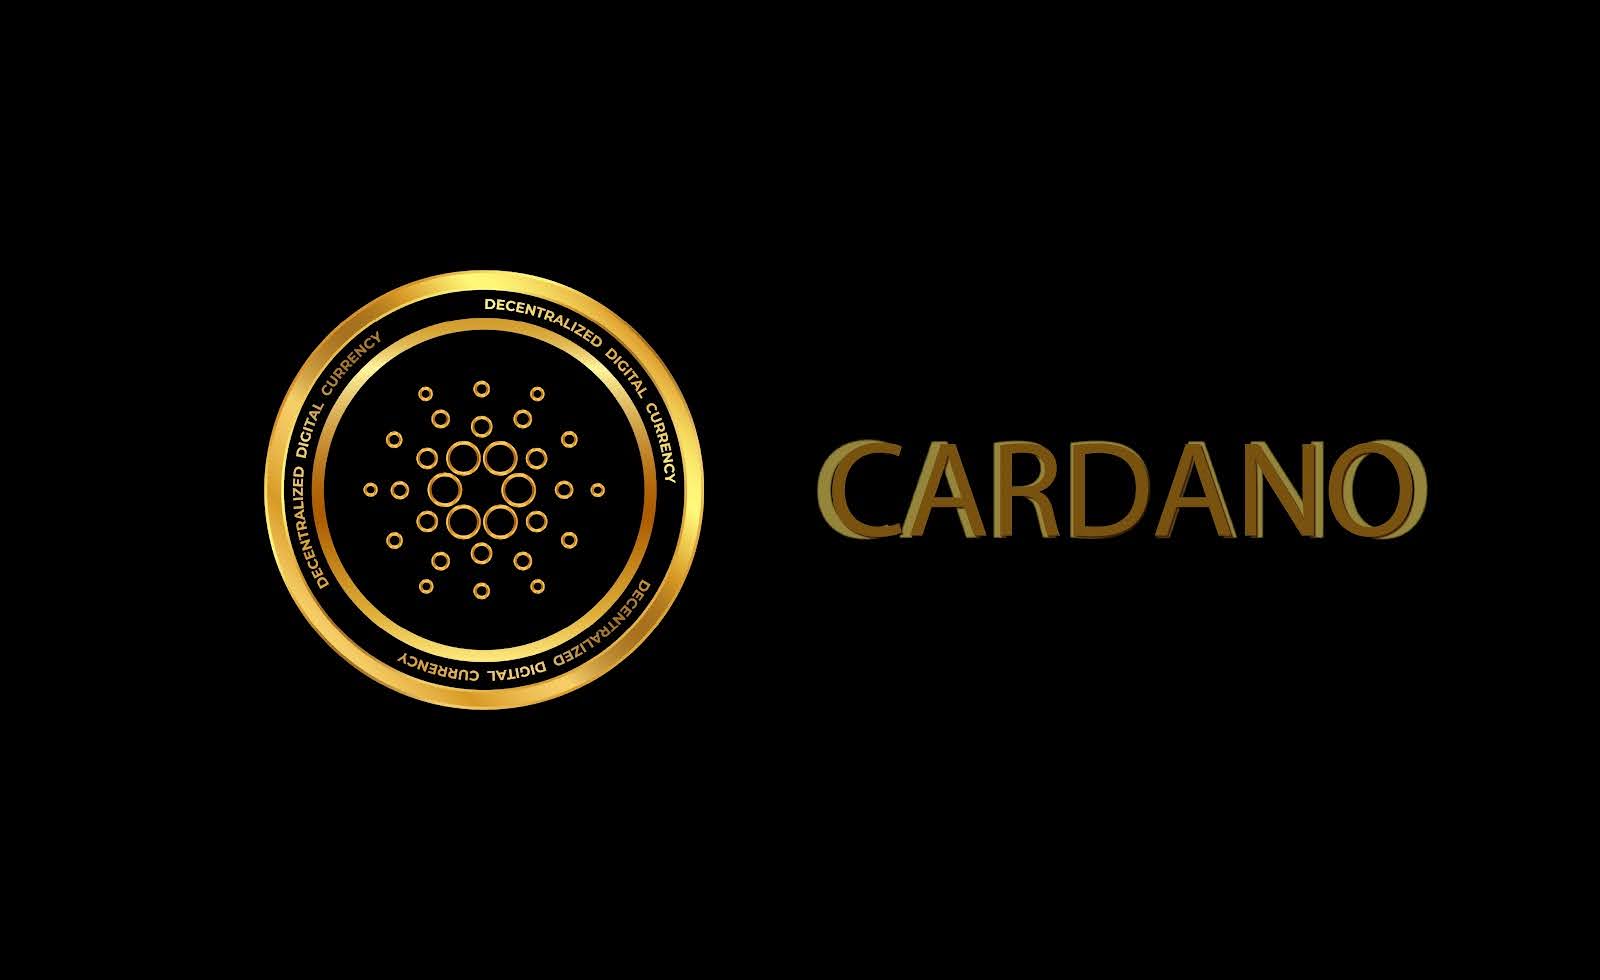 Cardano (ADA) Attempts New Highs Amid Ripple (XRP)’s Legal Saga While This New Meme Records New Presale Milestone